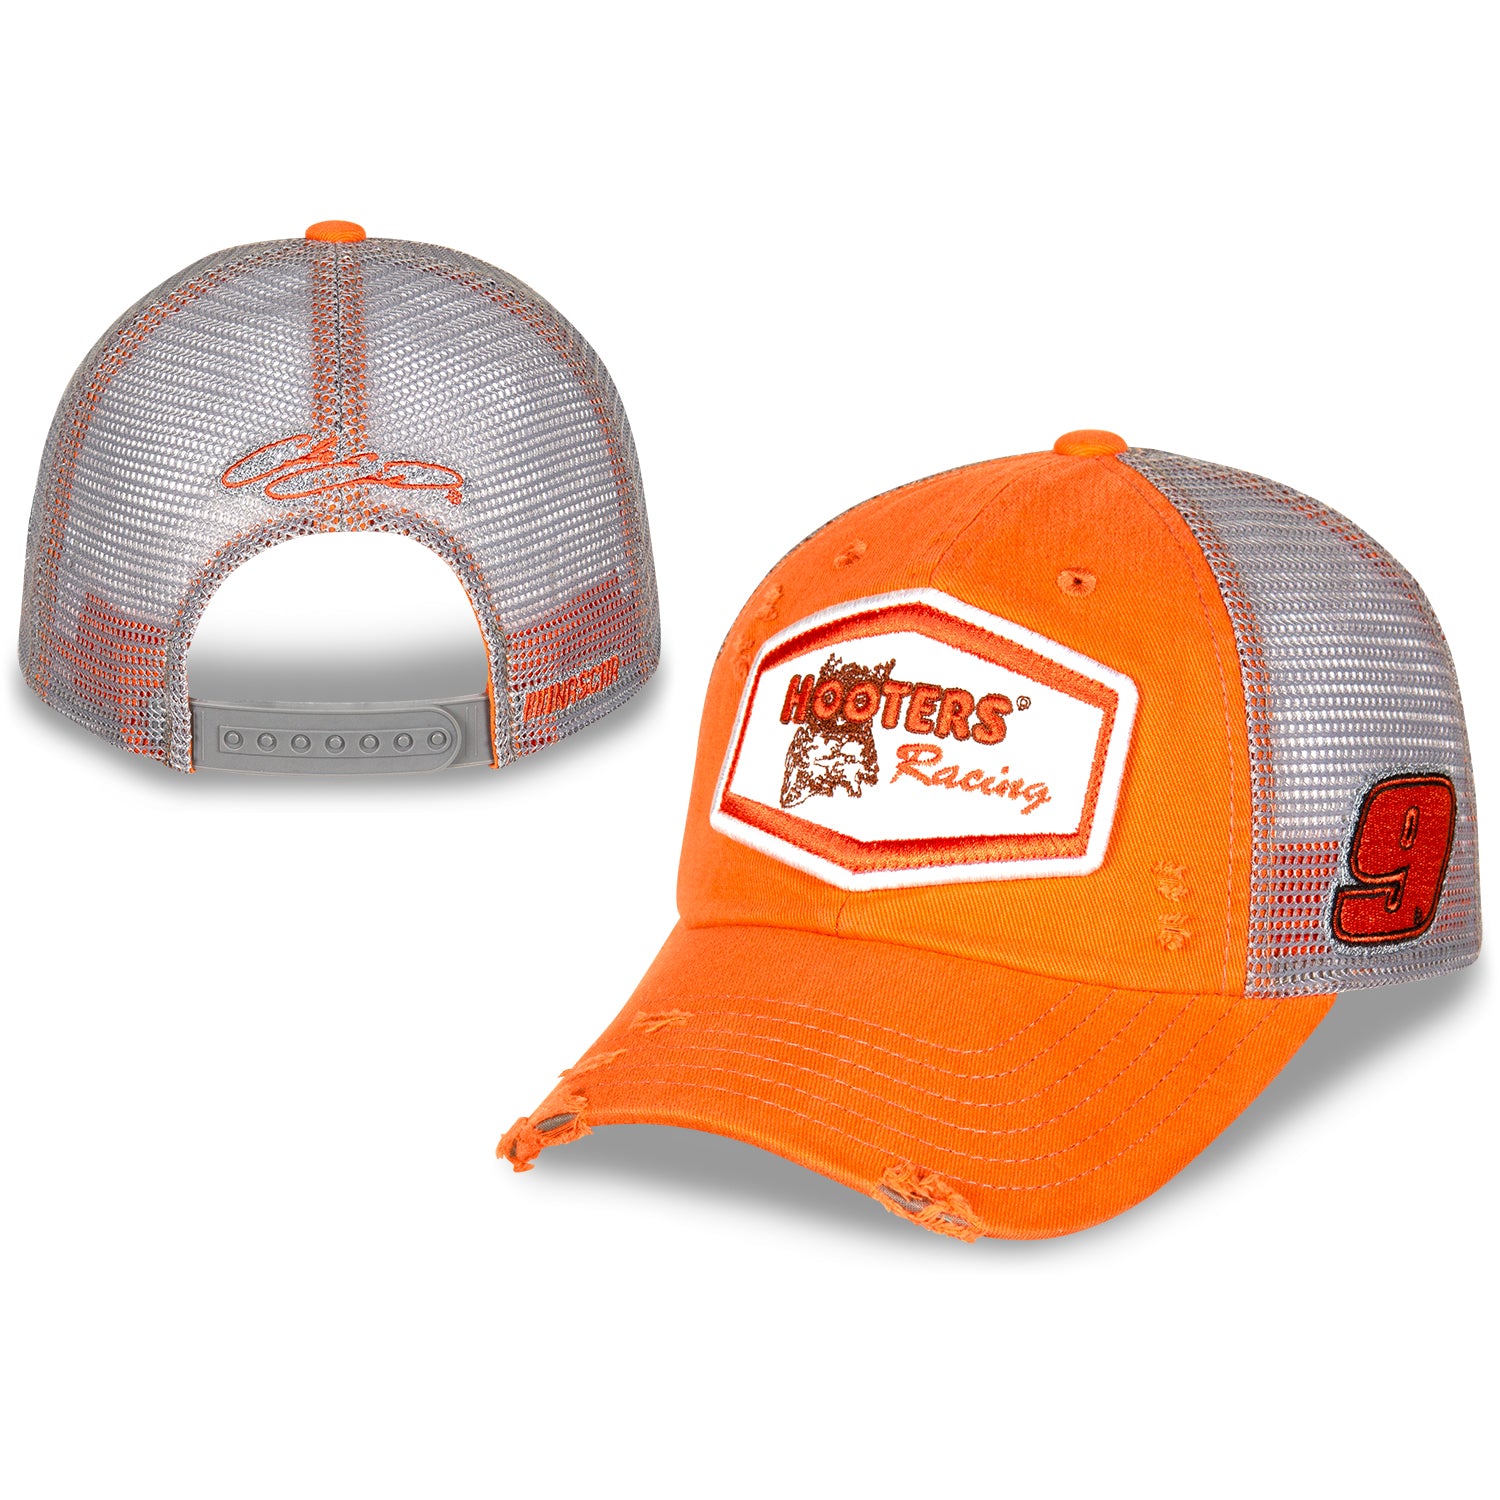 HOOTERS VINTAGE PATCH HAT